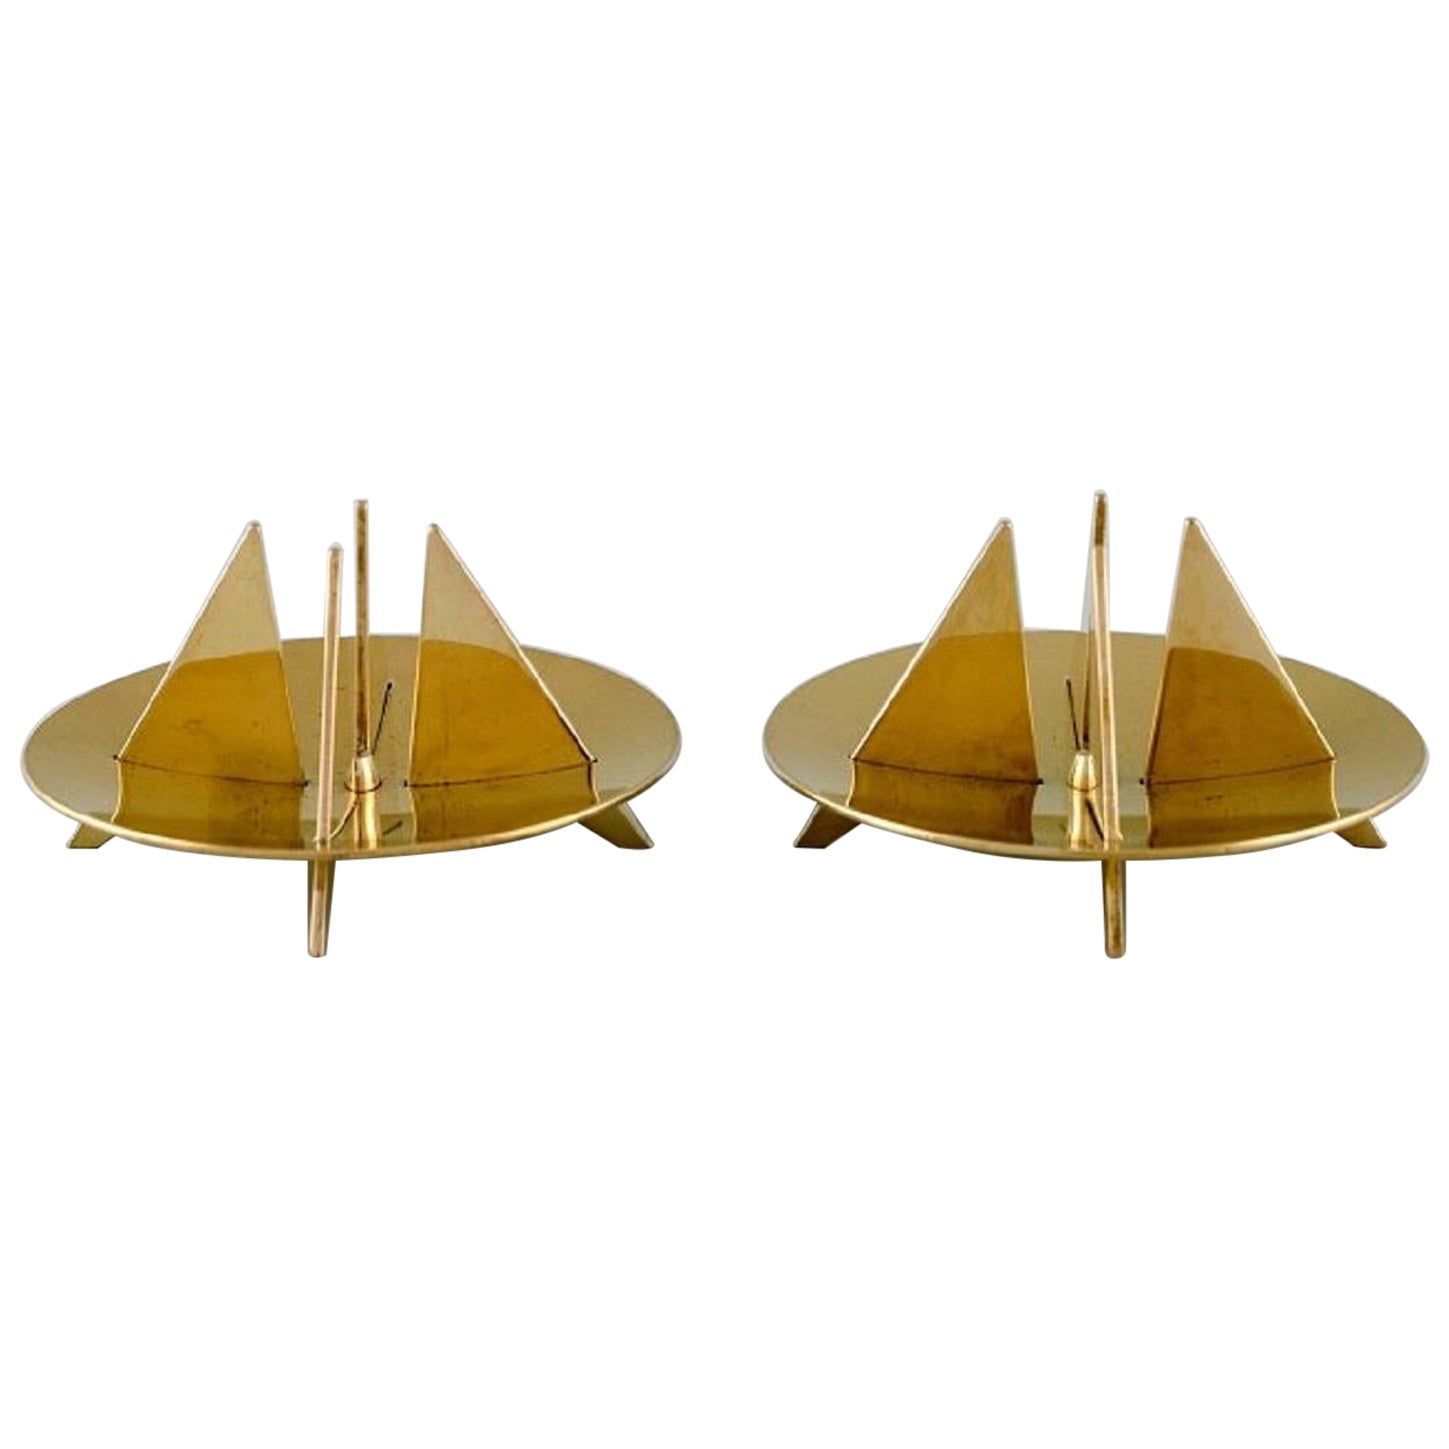 Pierre Forsell for Skultuna, a Pair of Sculptural Candlesticks For Sale